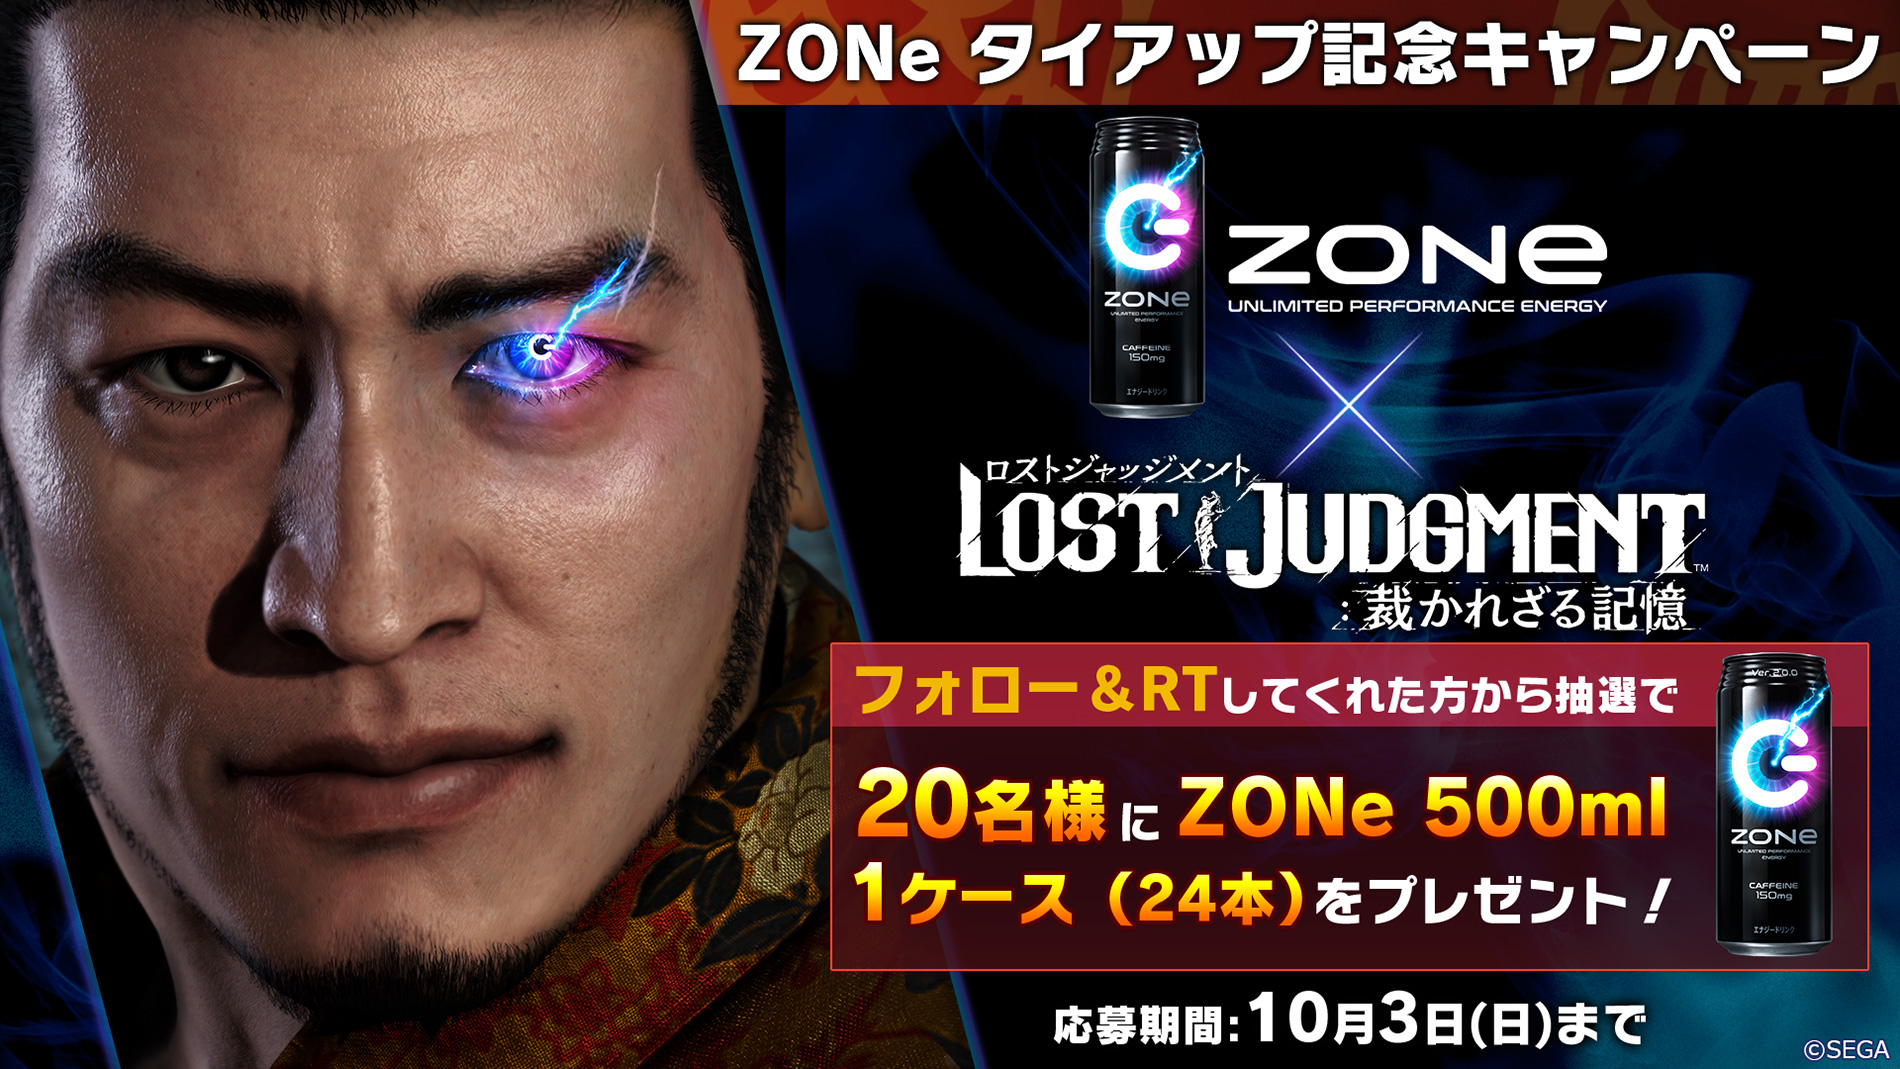 LOST JUDGMENT：裁かれざる記憶』×「ZONe」 超没入エナジードリンク